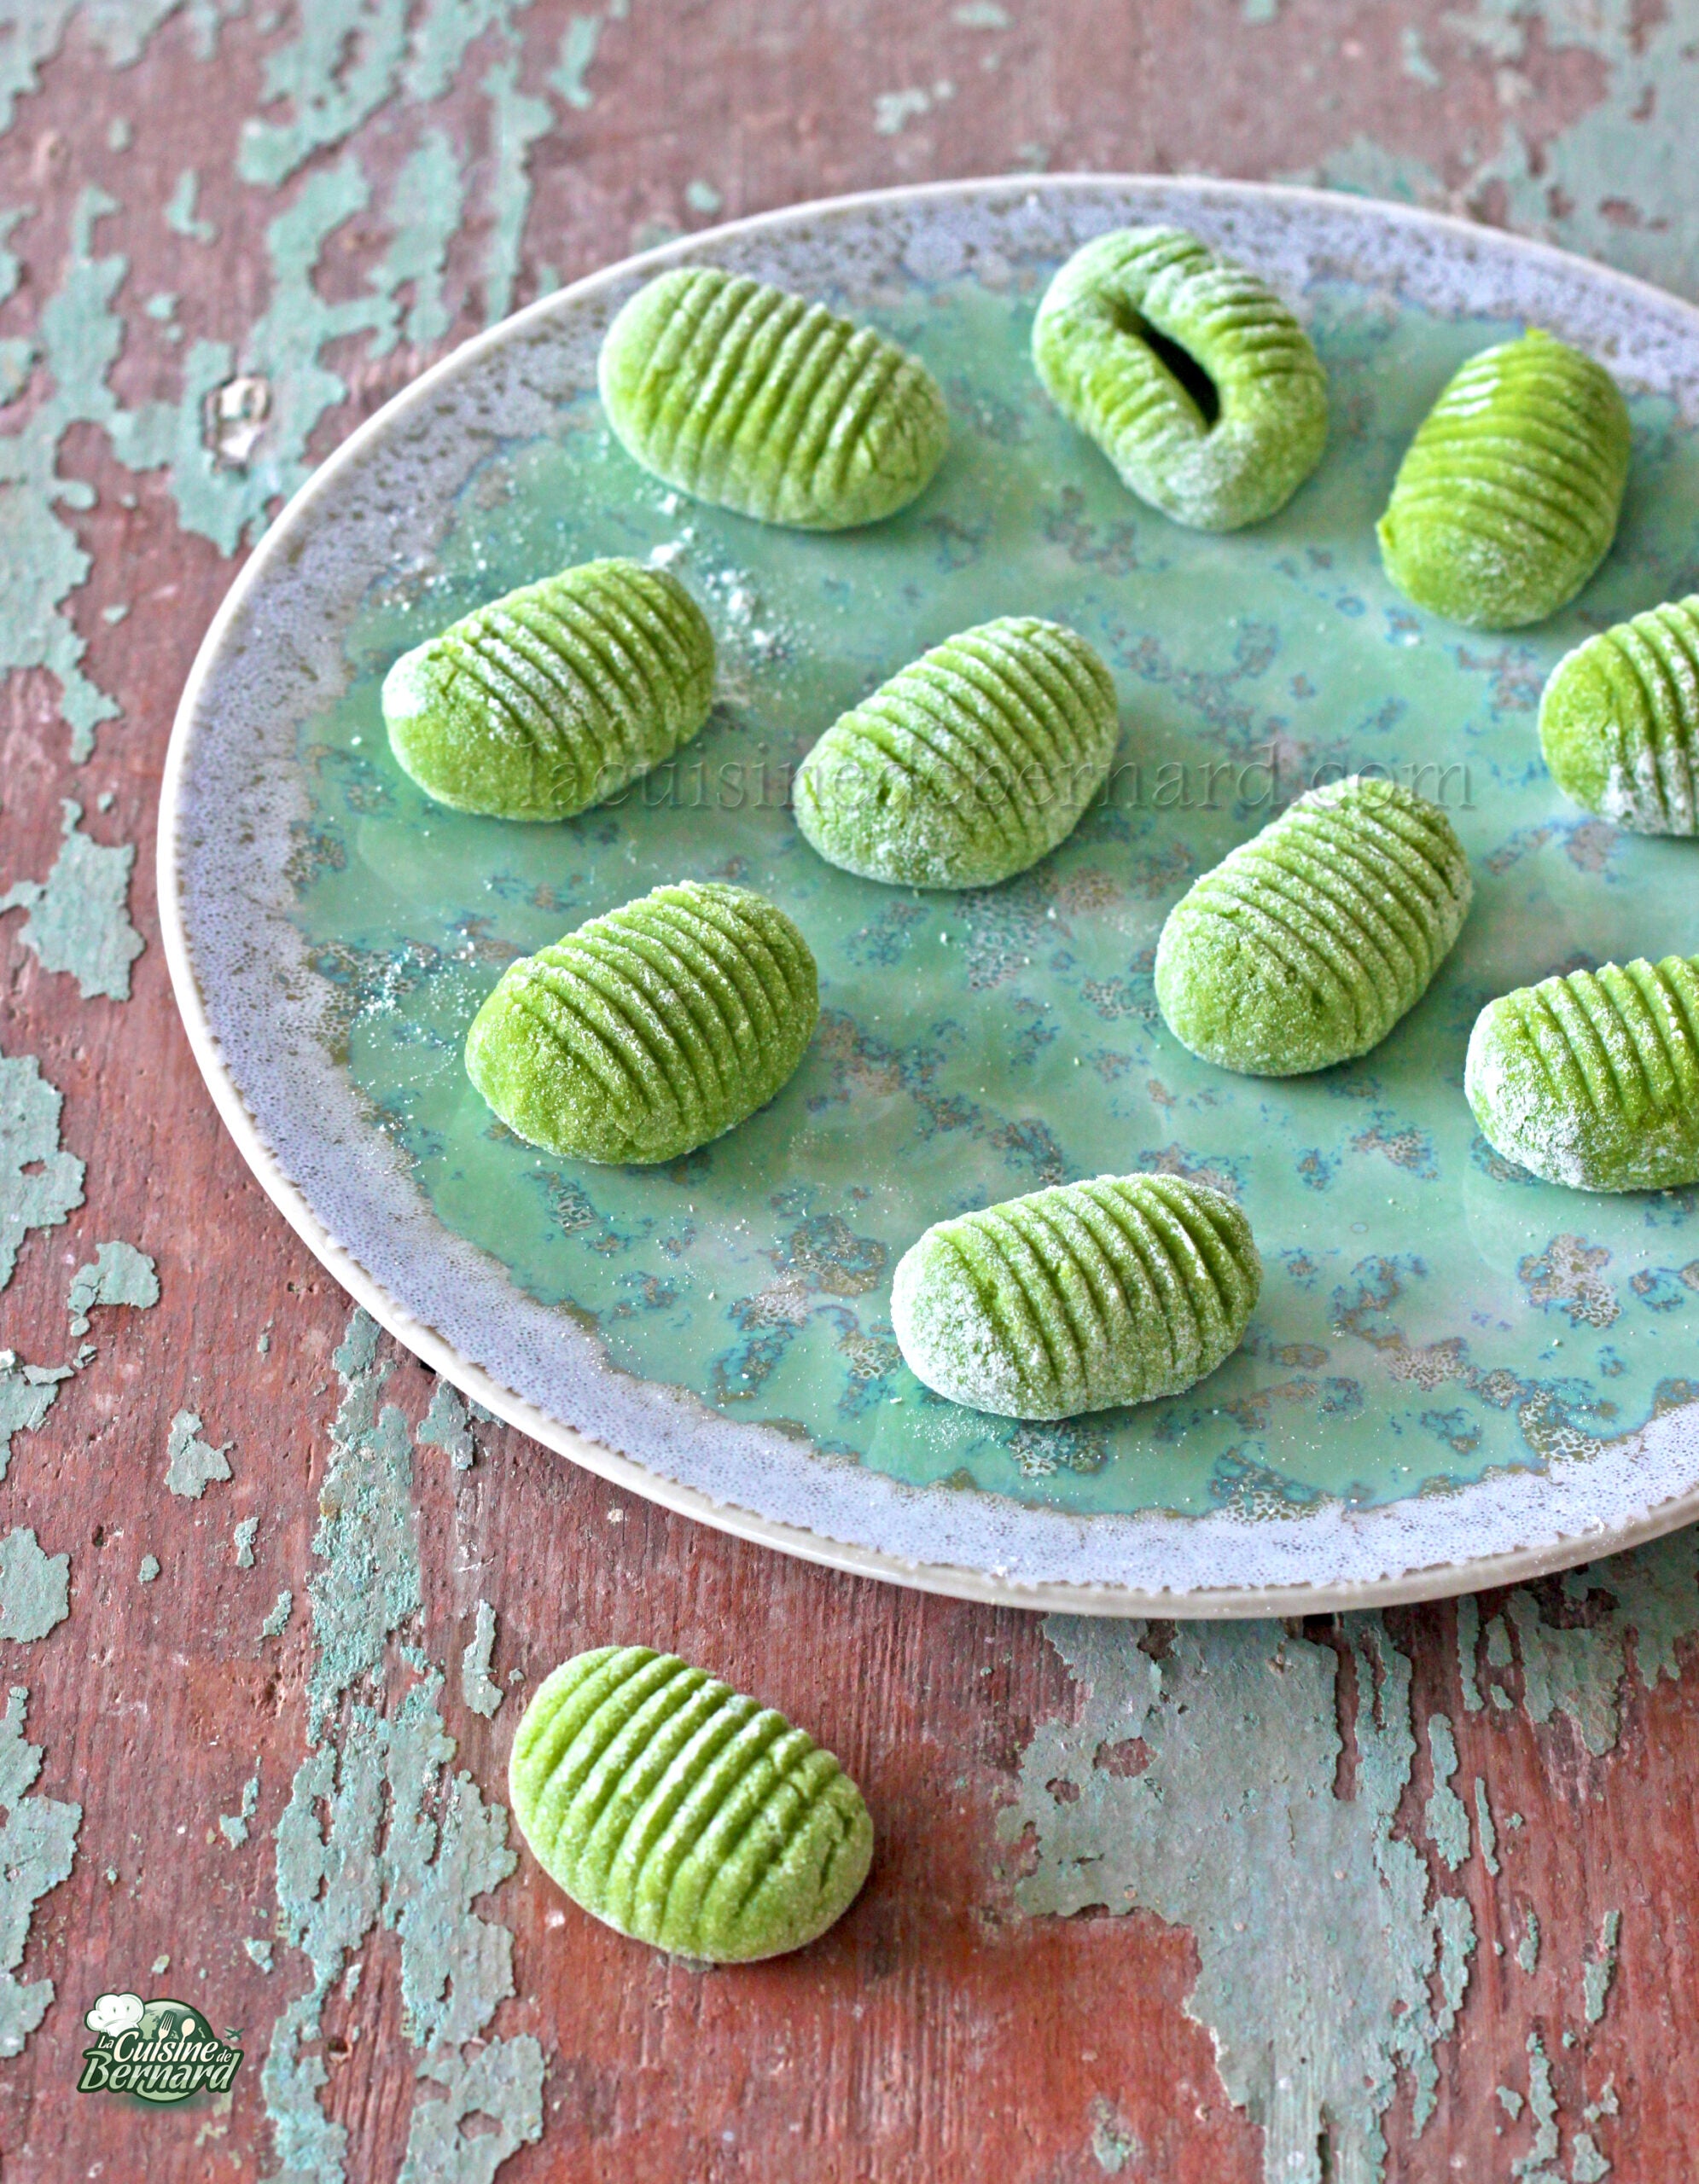 Gluten Free Spinach Gnocchi by Kisses from Italy, 500g